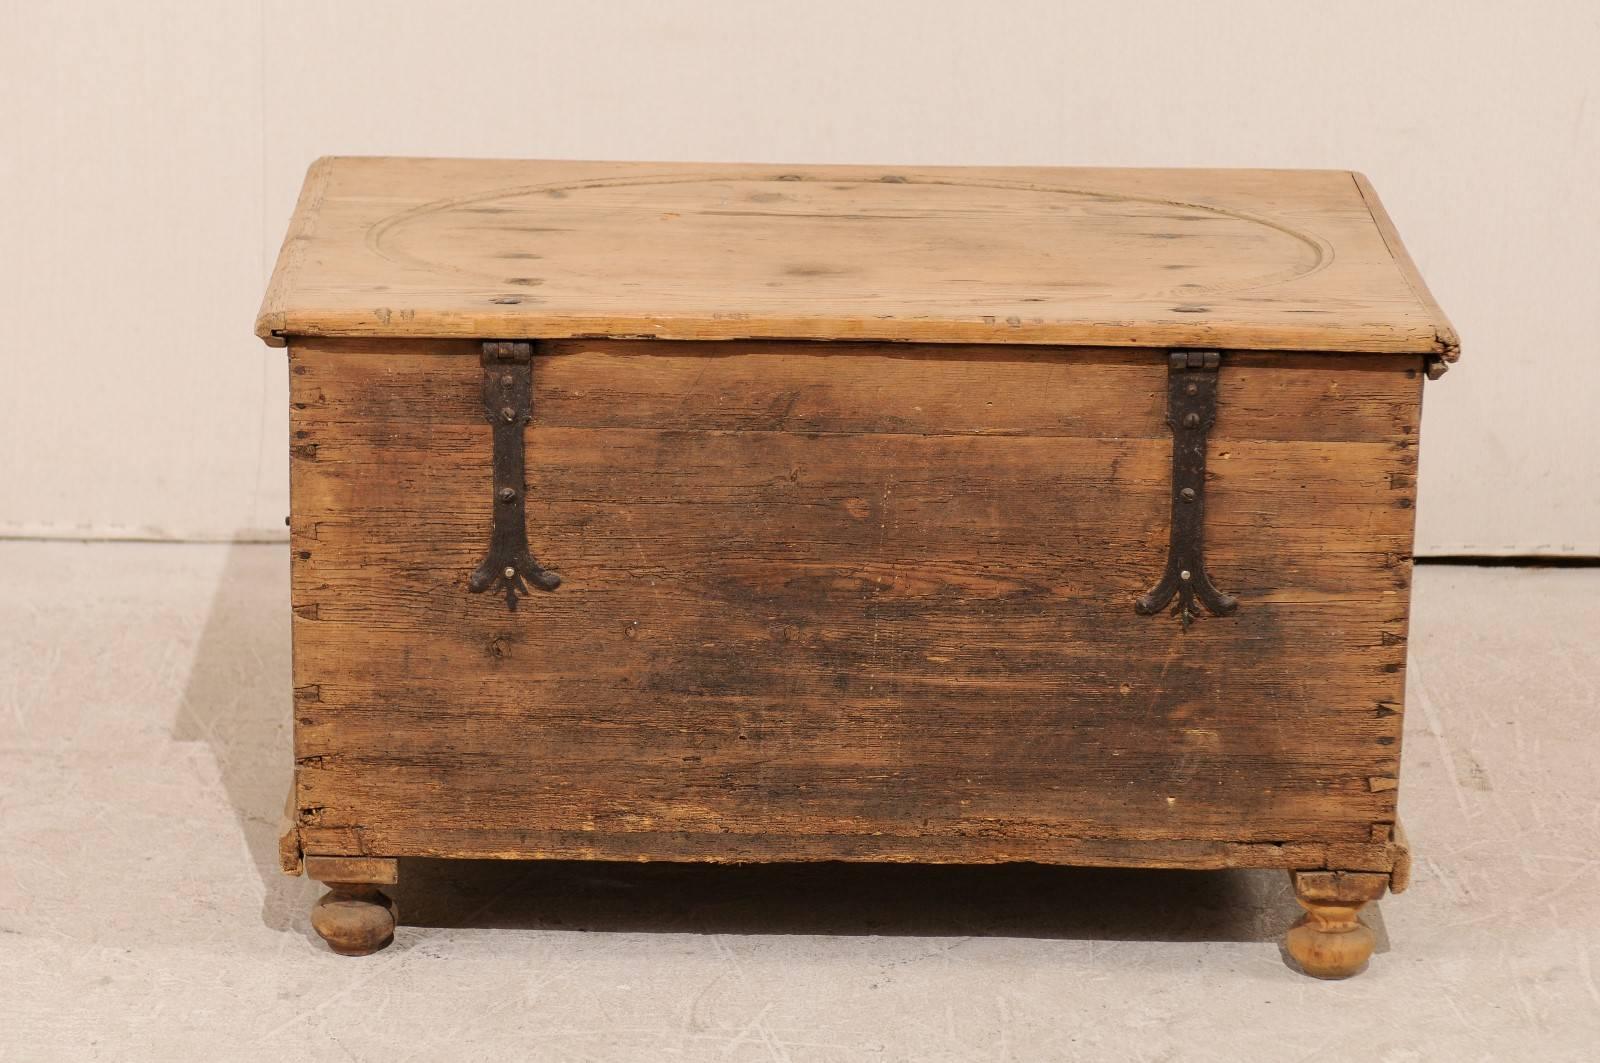 19th Century Pine Wood Coffer or Trunk with Shield-Like Carvings on the Front 1